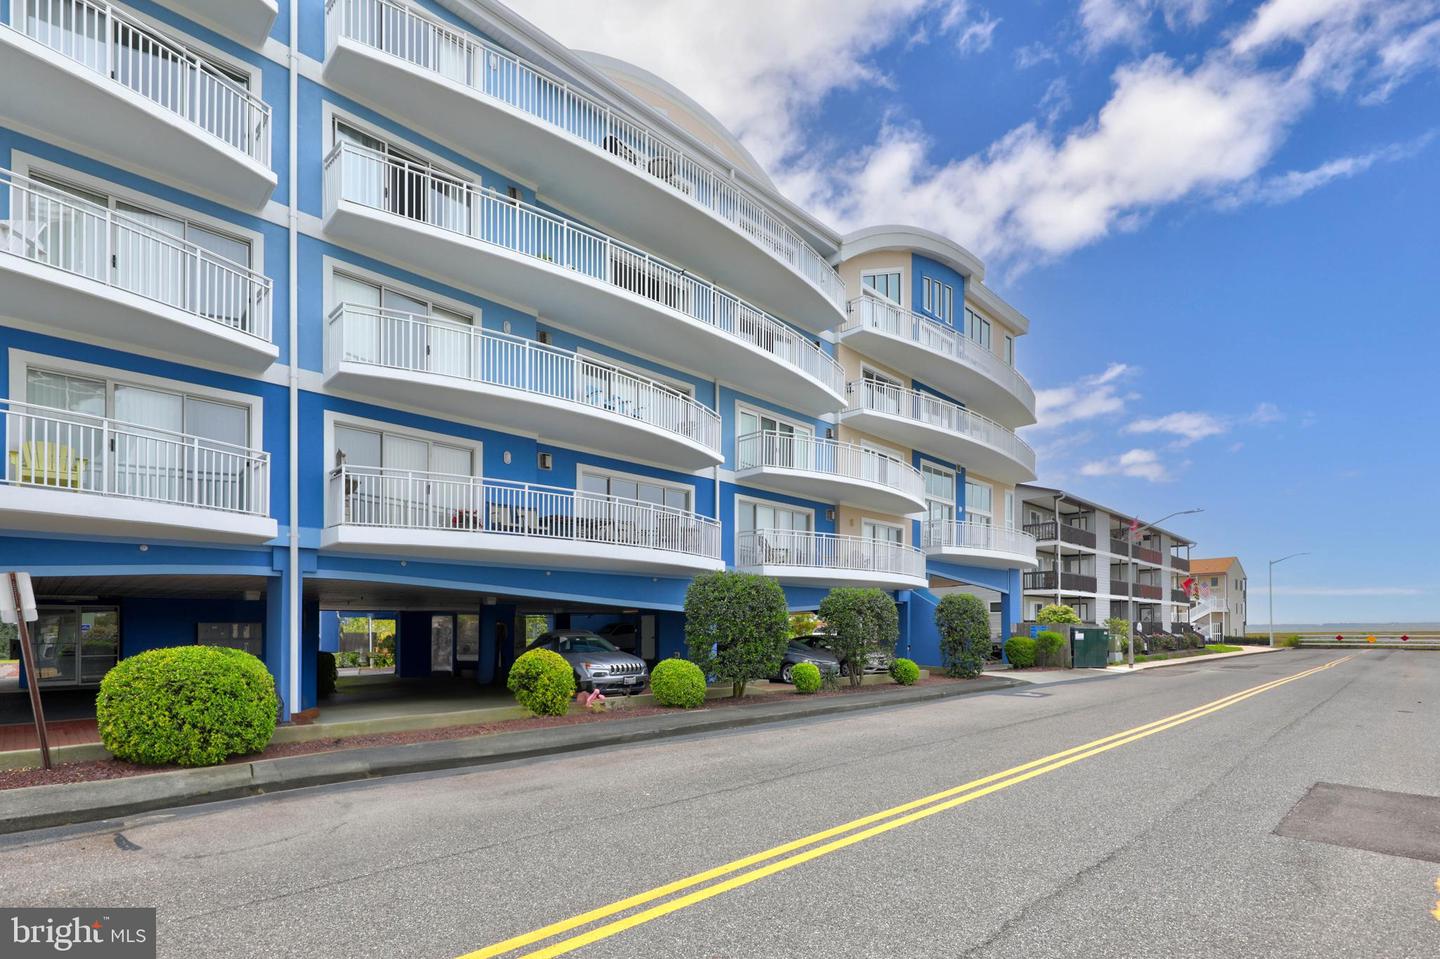 MDWO2014476-802397525076-2024-02-22-06-03-10 111 76th St #101 | Ocean City, MD Real Estate For Sale | MLS# Mdwo2014476  - 1st Choice Properties